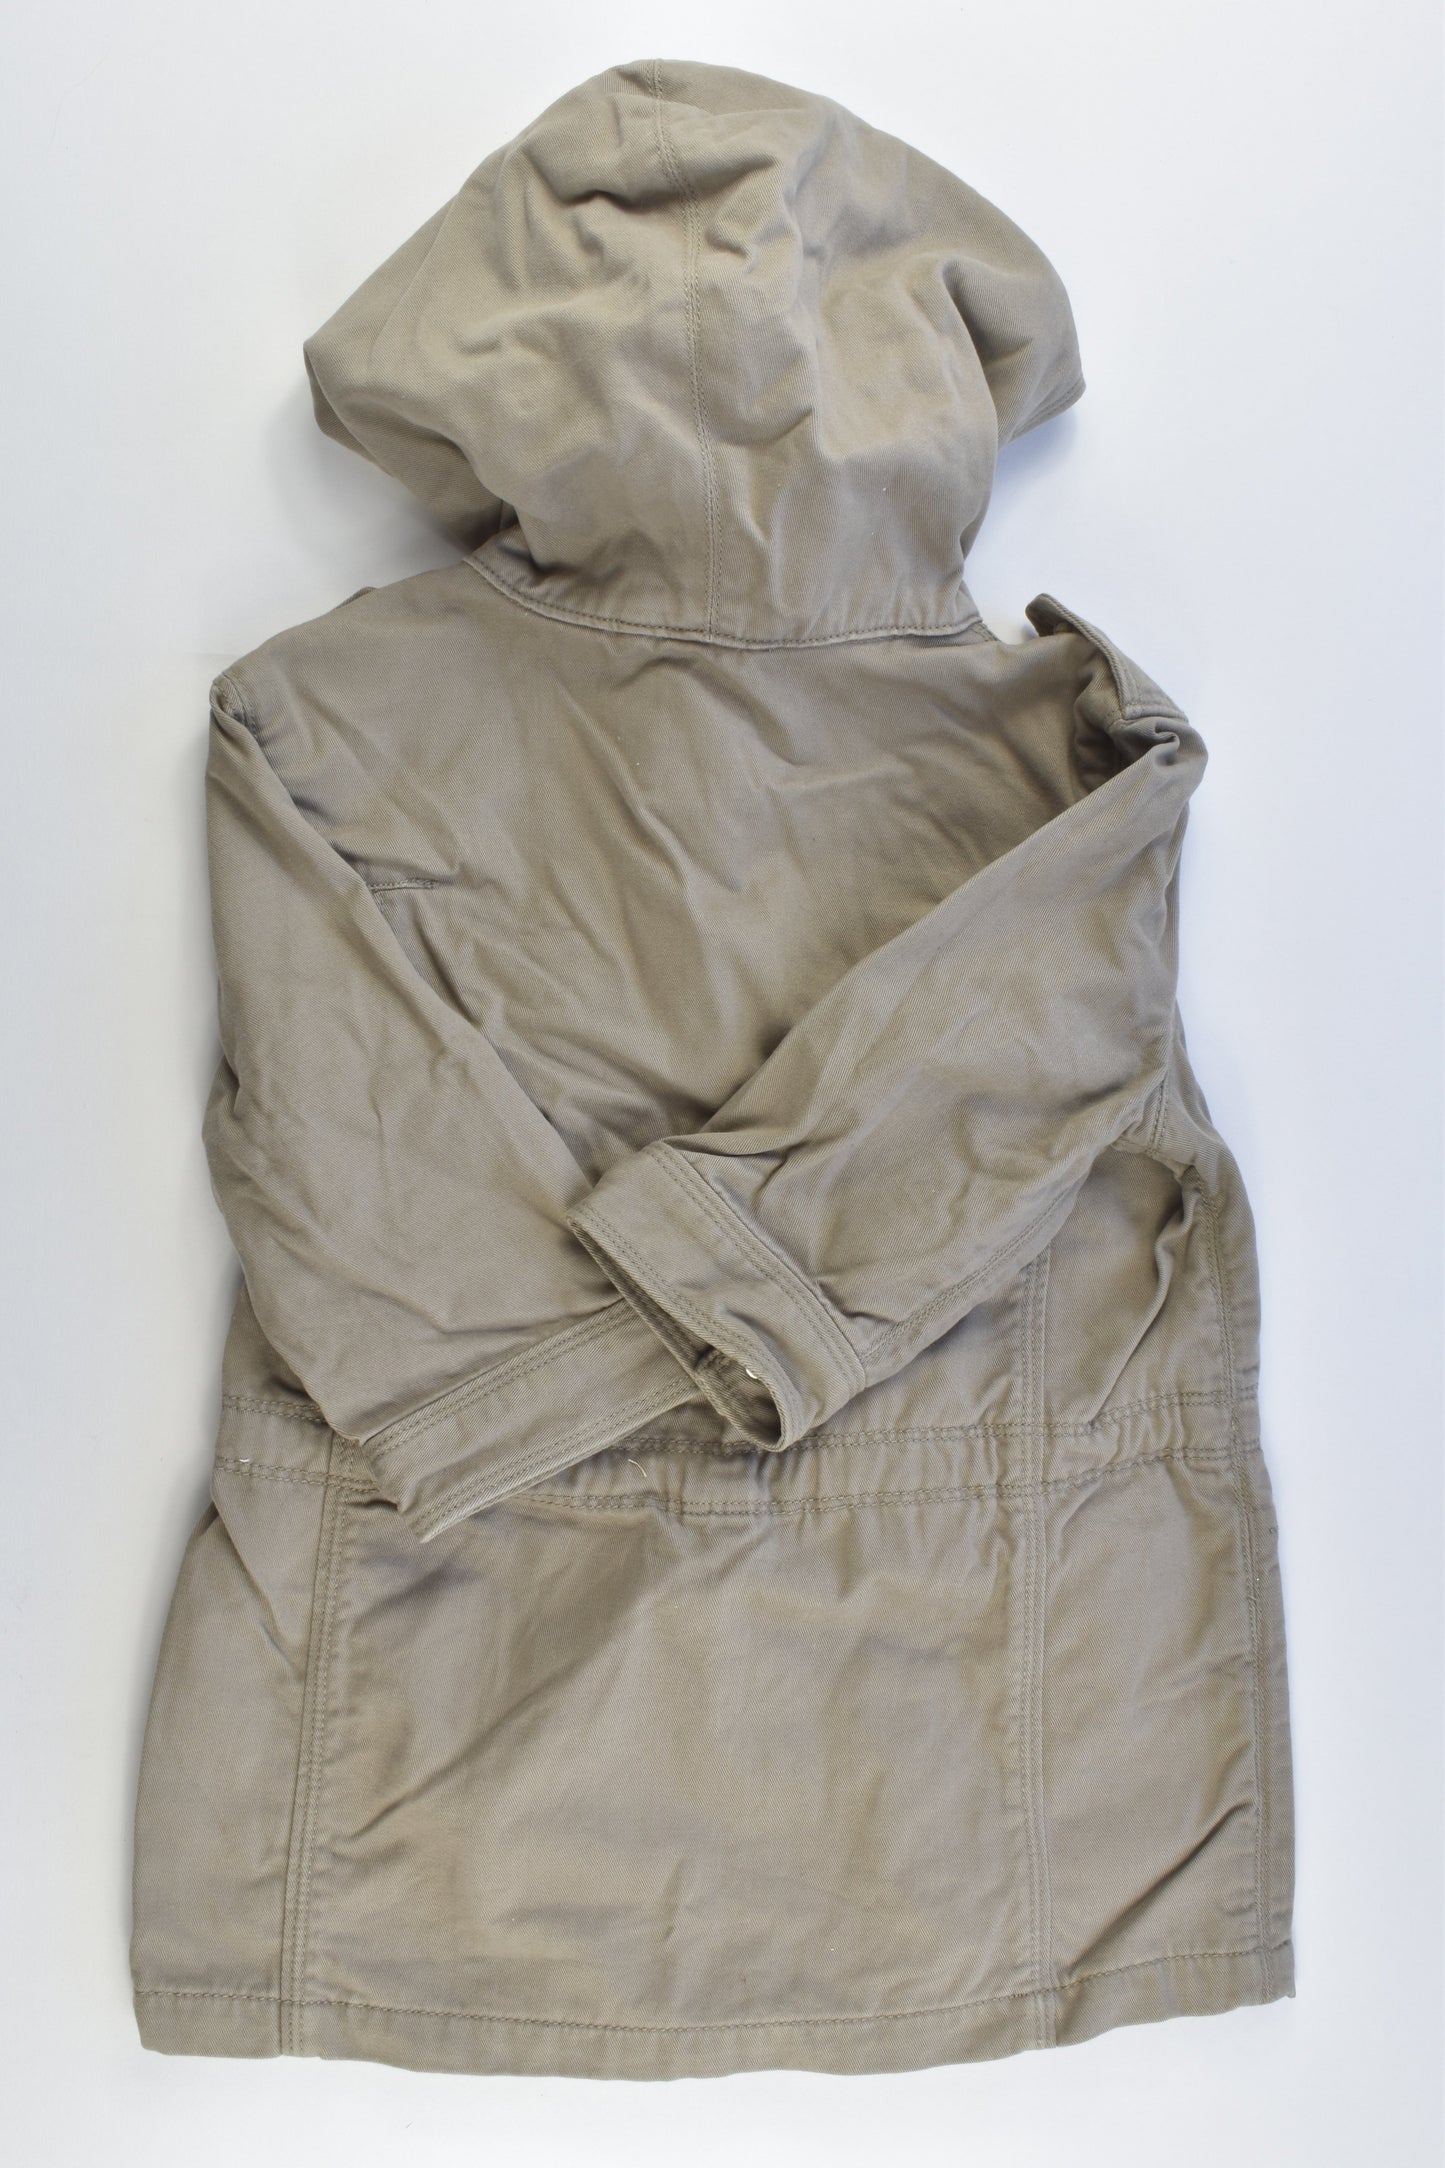 Country Road Size approx 1-2 Hooded Jacket